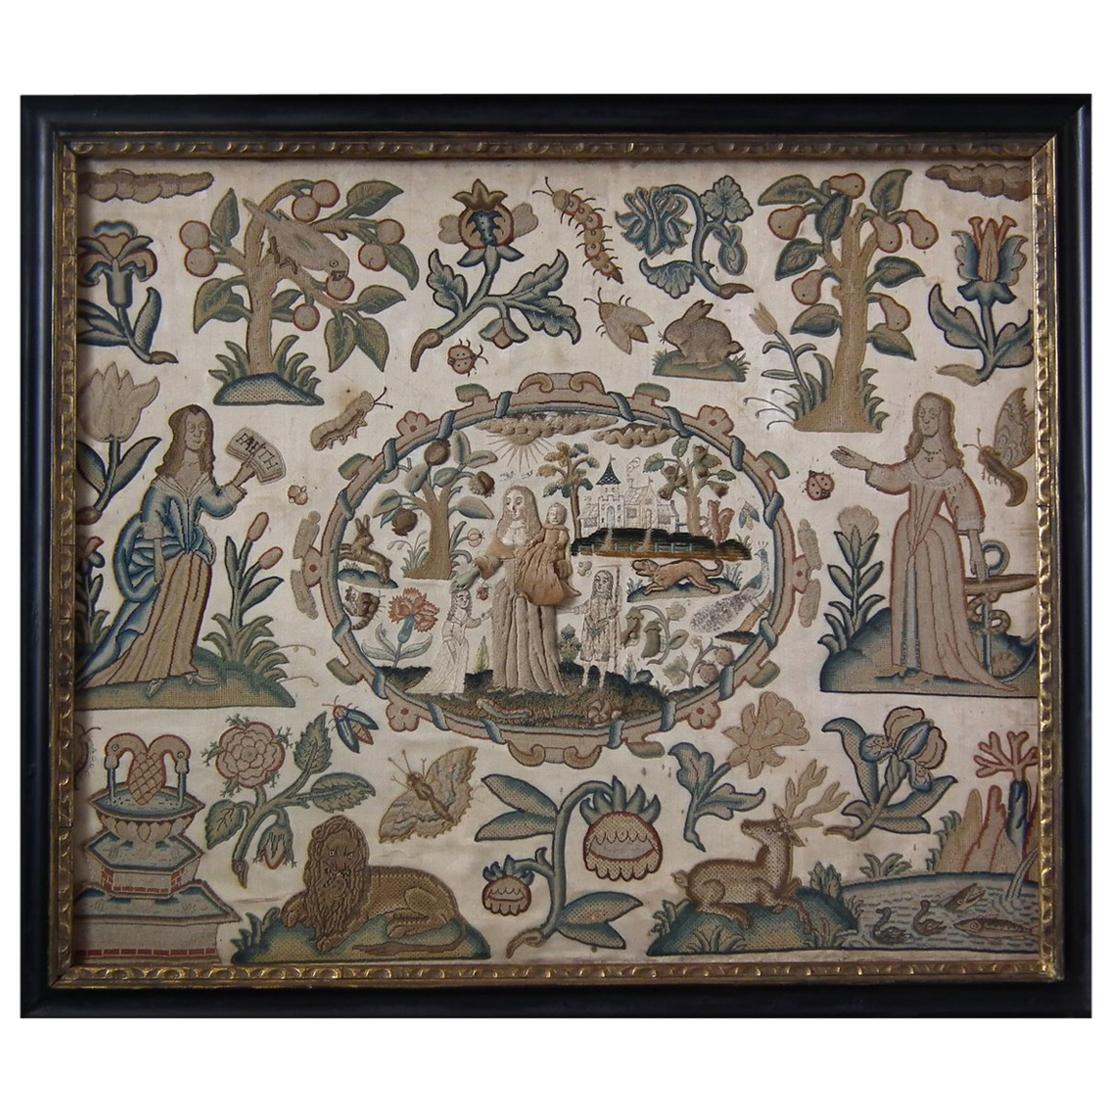 Antique Stumpwork Embroidery of Faith, Hope & Charity